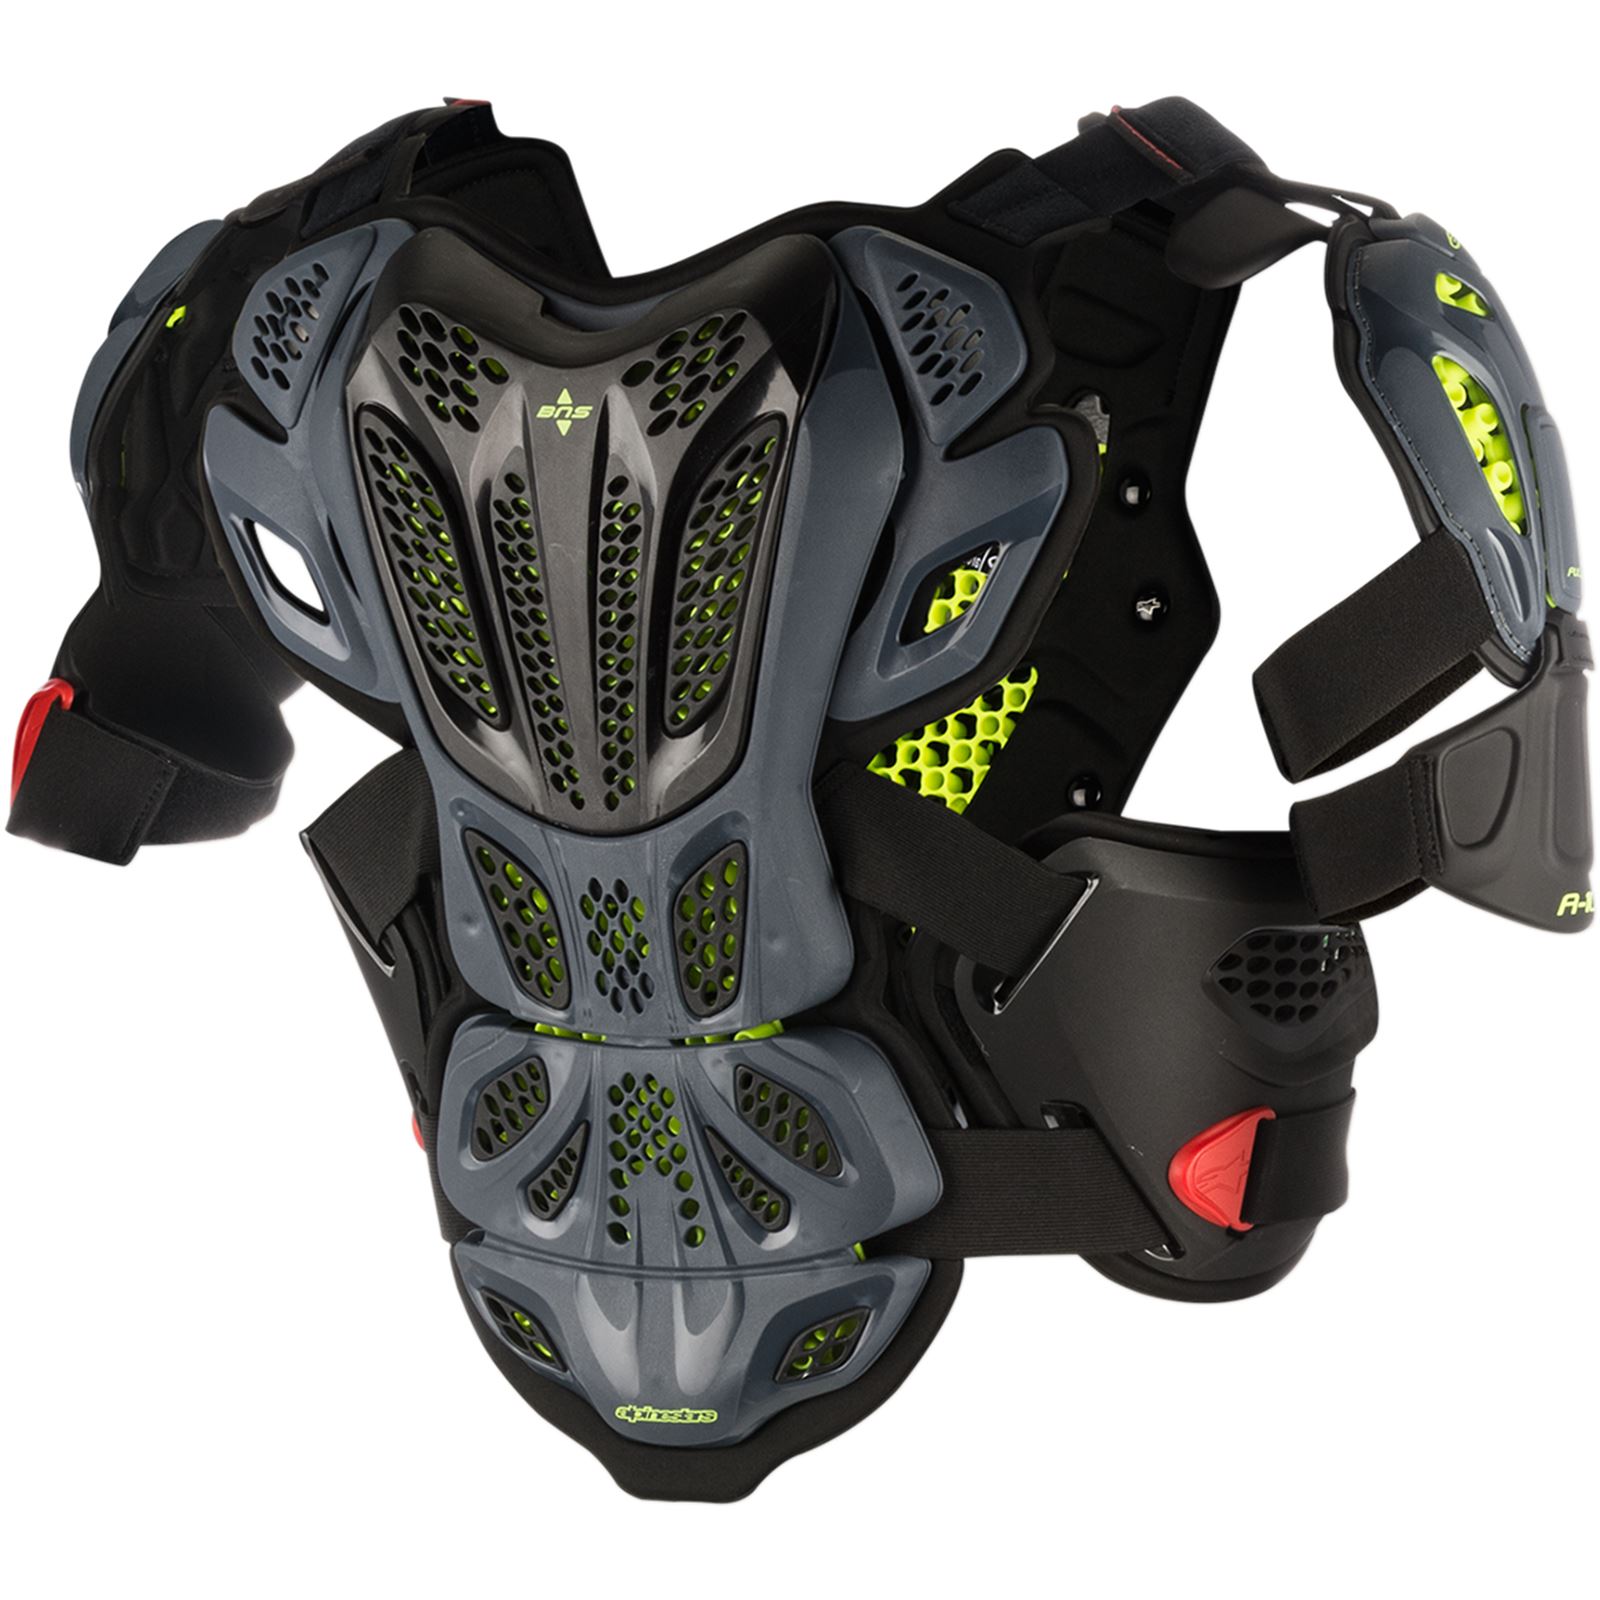 Alpinestars A-10 Full Chest Protector - Black/Red - X-Large/2X-Large